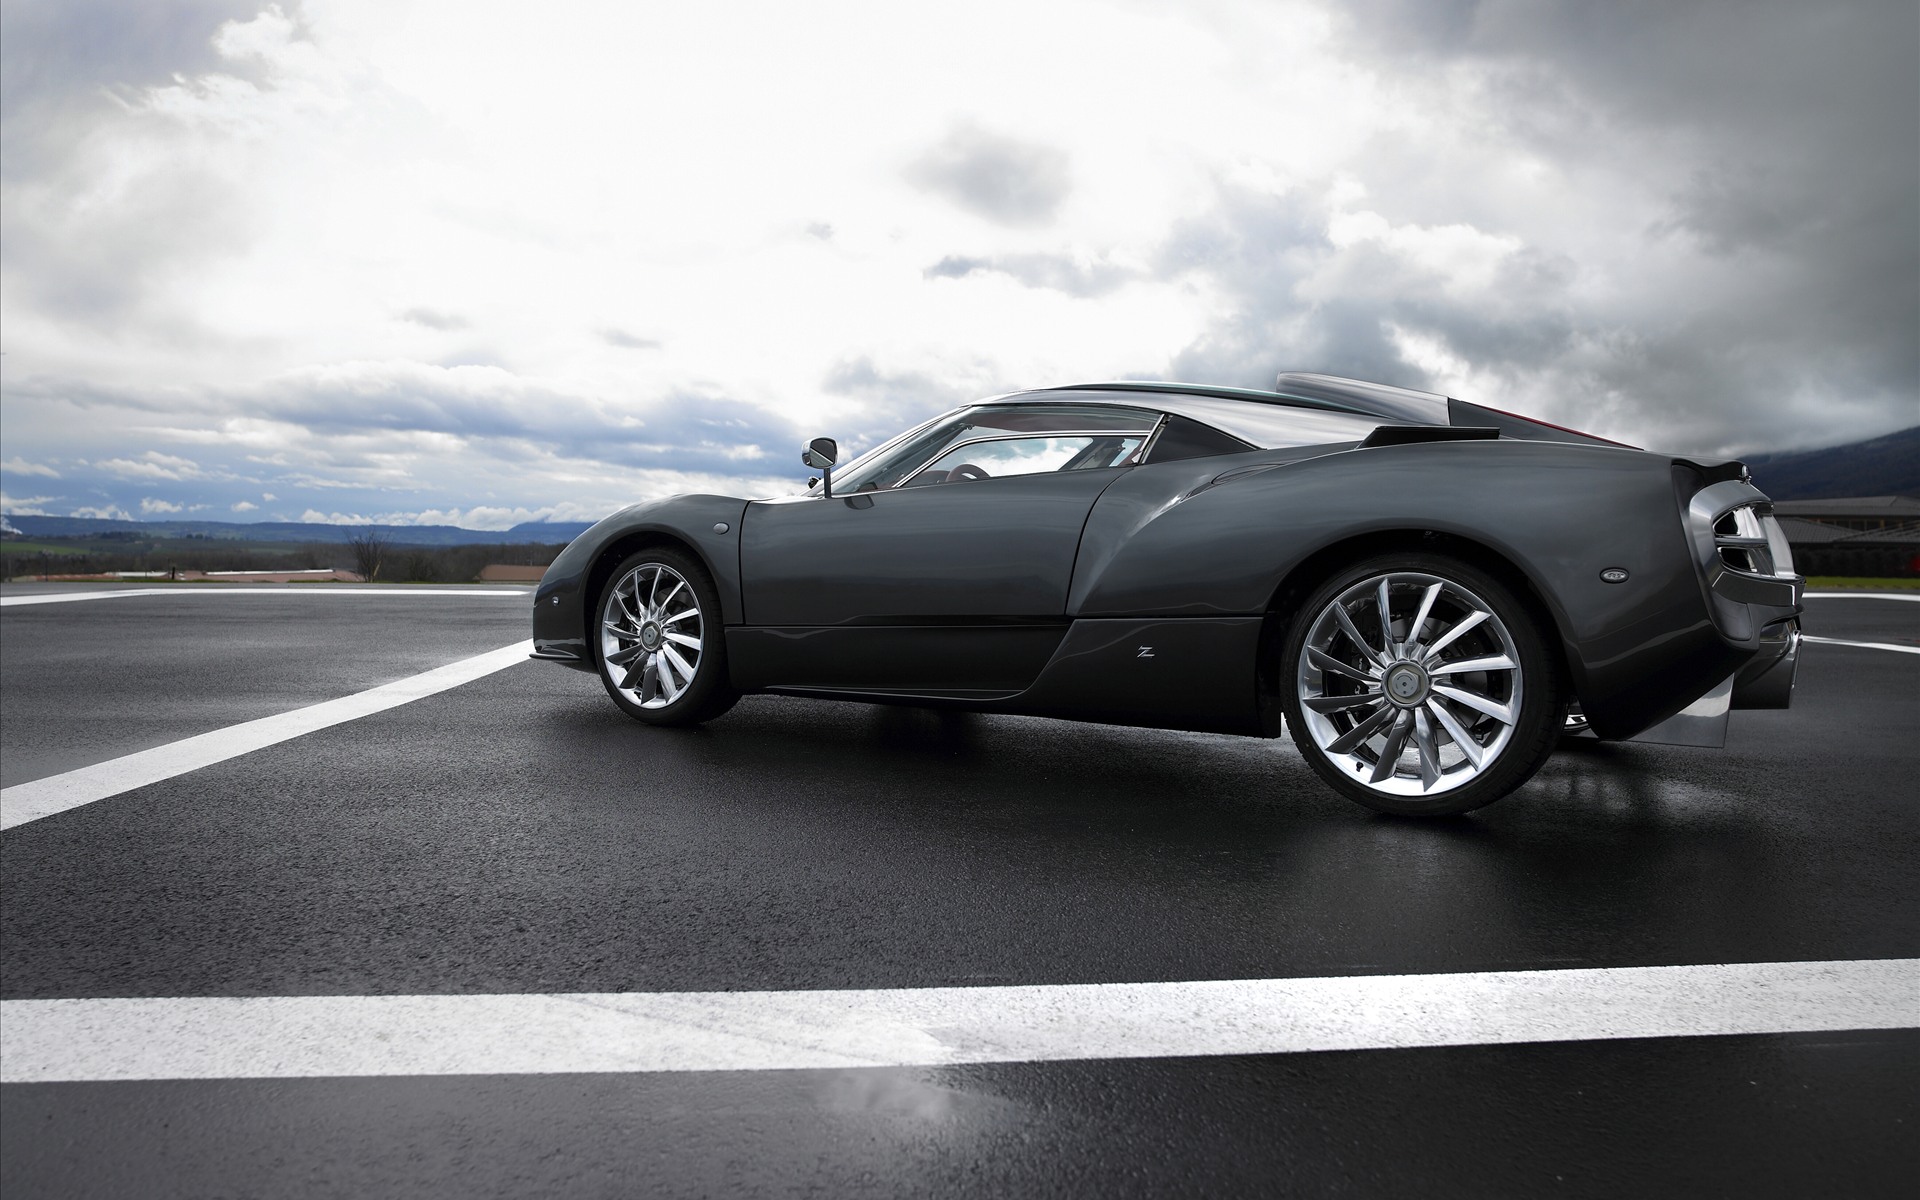 Auto Other auto wallpapers Nice sport car 015025 jpg